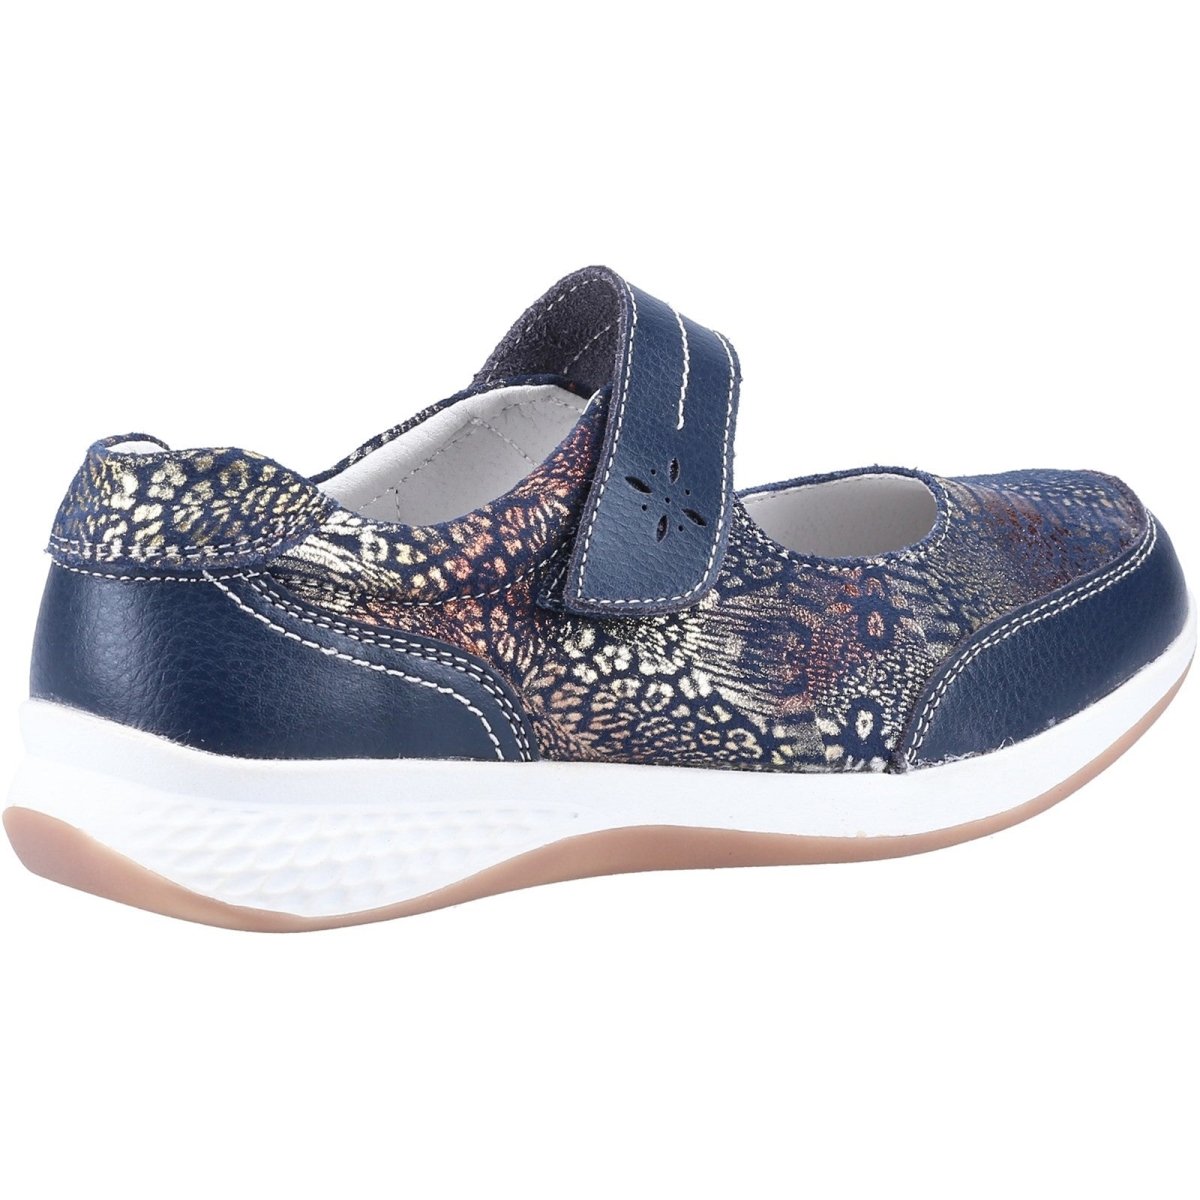 Fleet & Foster Laura Ladies Mary Jane Touch-Fastening Shoes - Shoe Store Direct